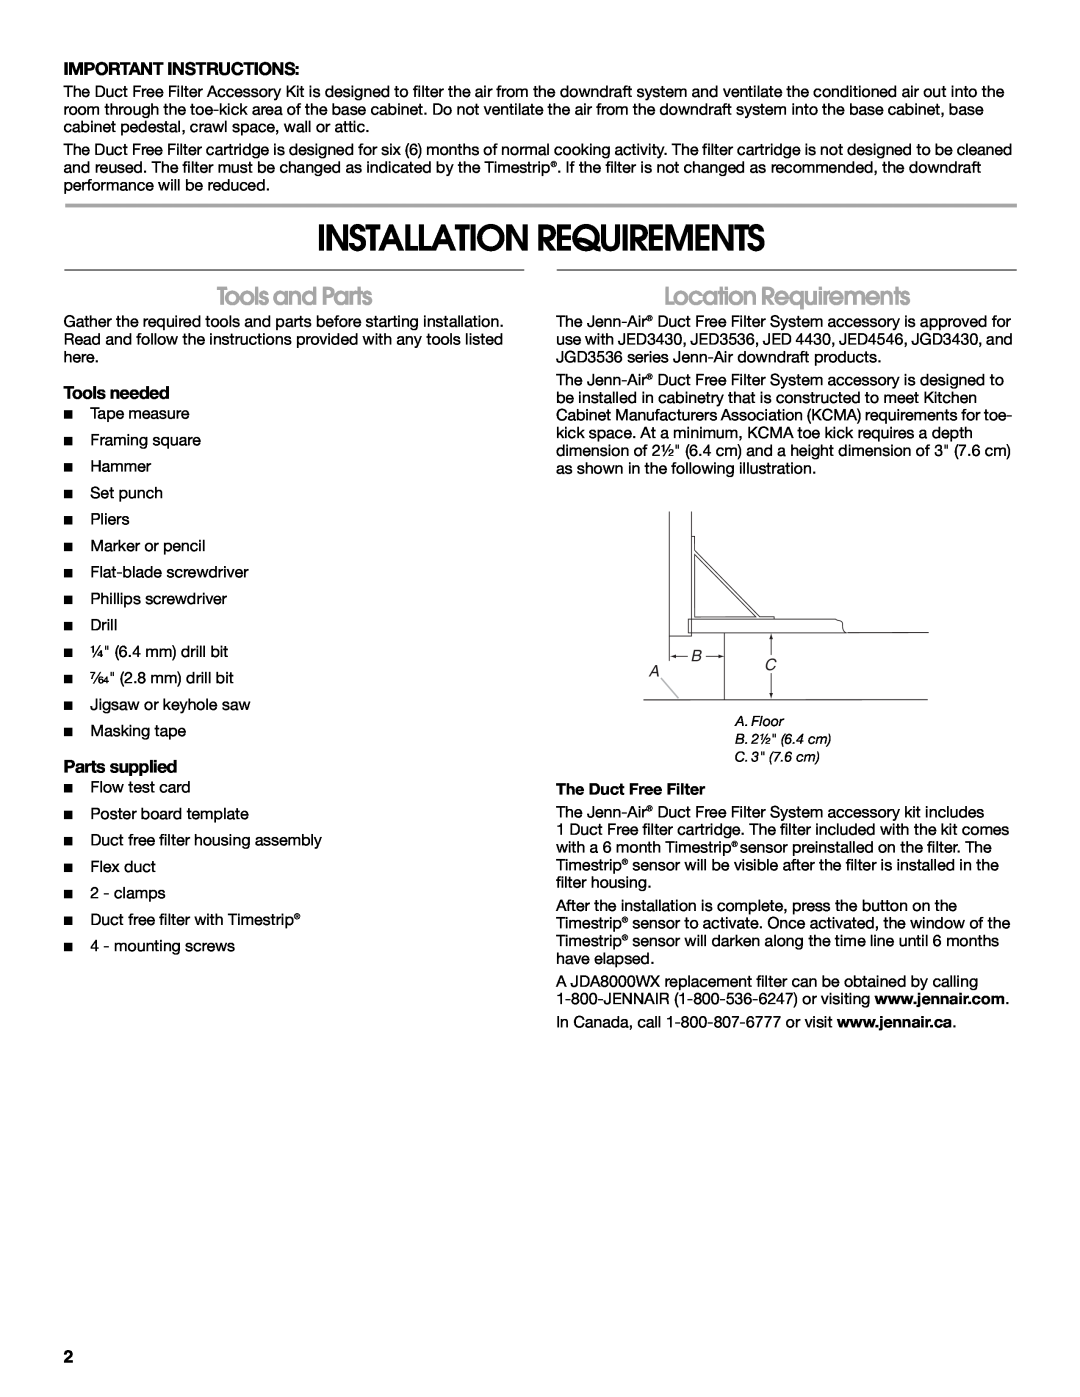 Jenn-Air W10439669A Installation Requirements, Tools and Parts, Location Requirements, Important Instructions 